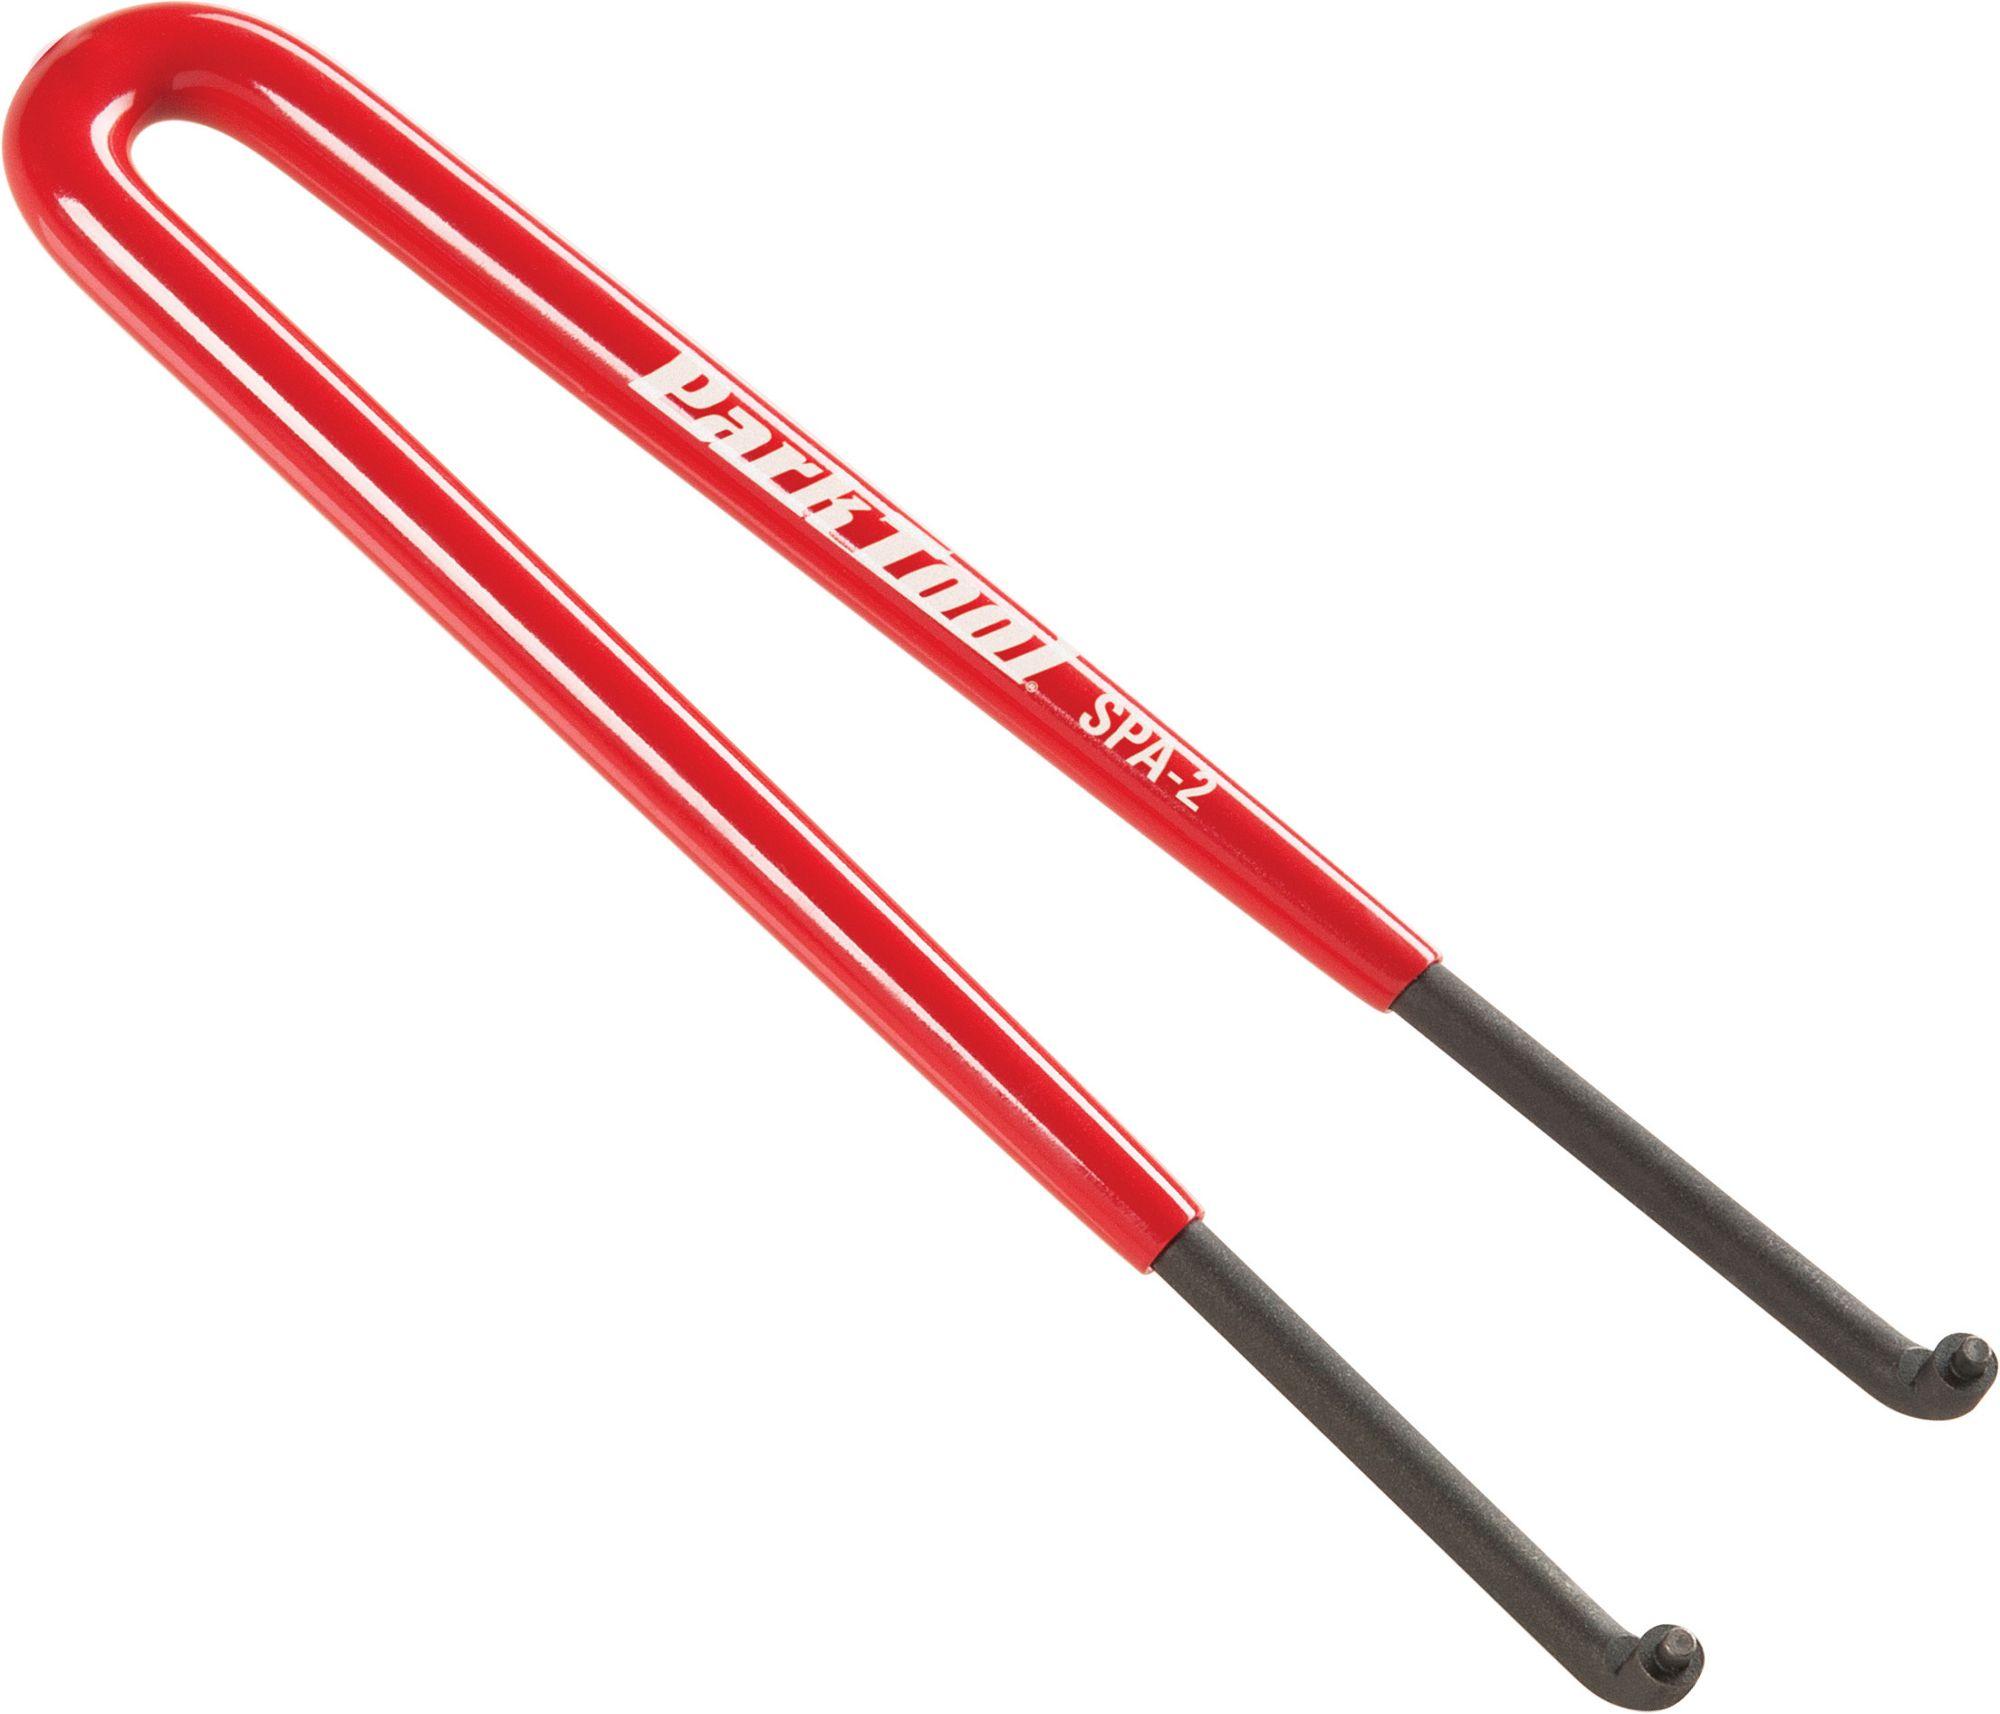 Park Tool Spa2c Adjustable Hanger Cup Pin Spanner - Red